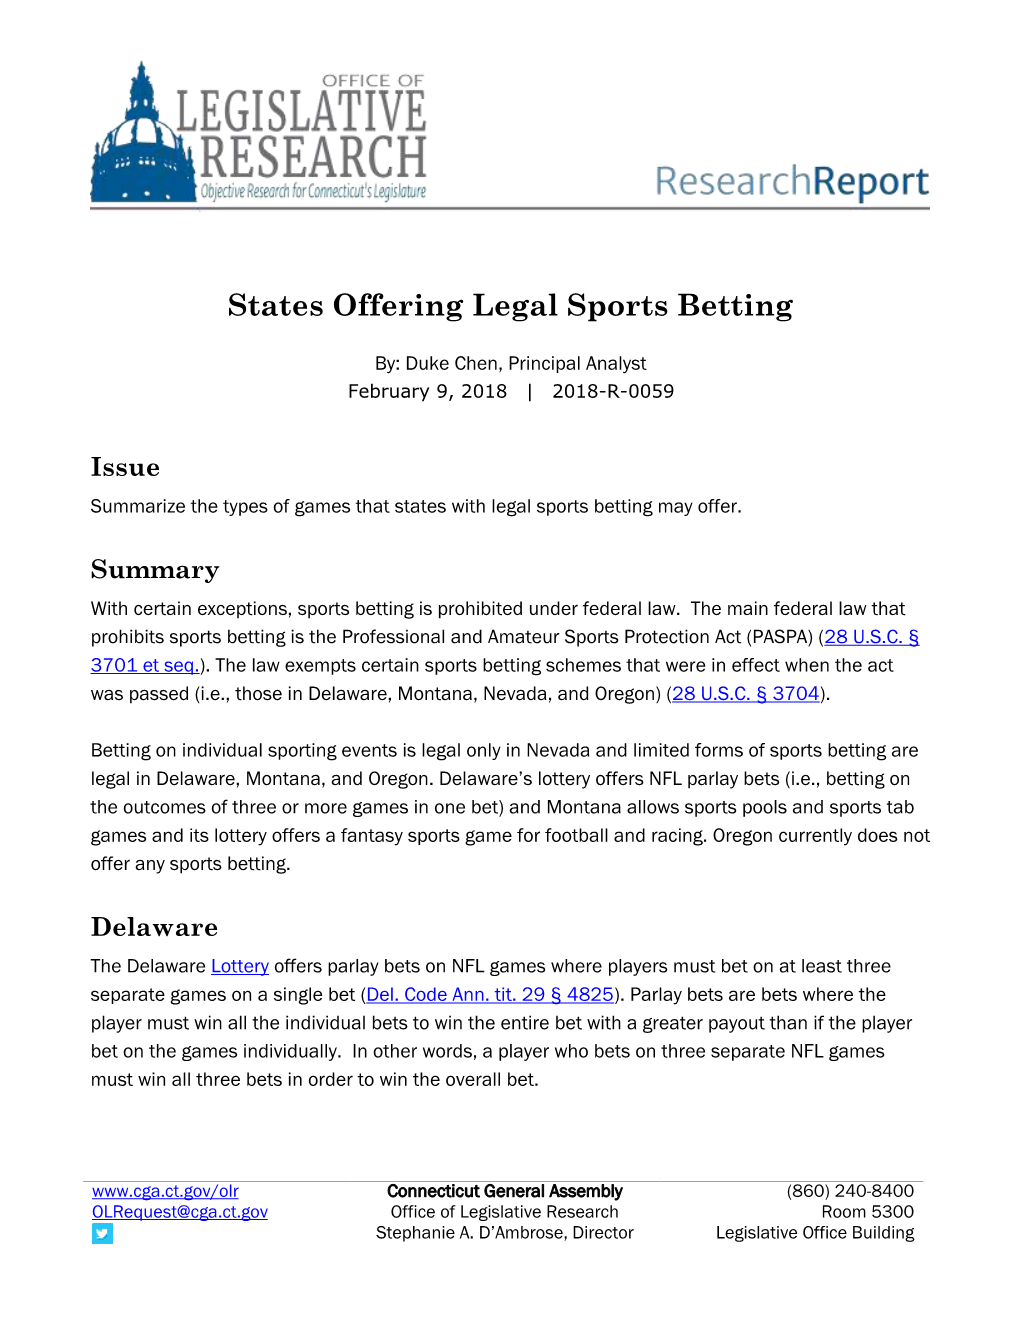 States Offering Legal Sports Betting